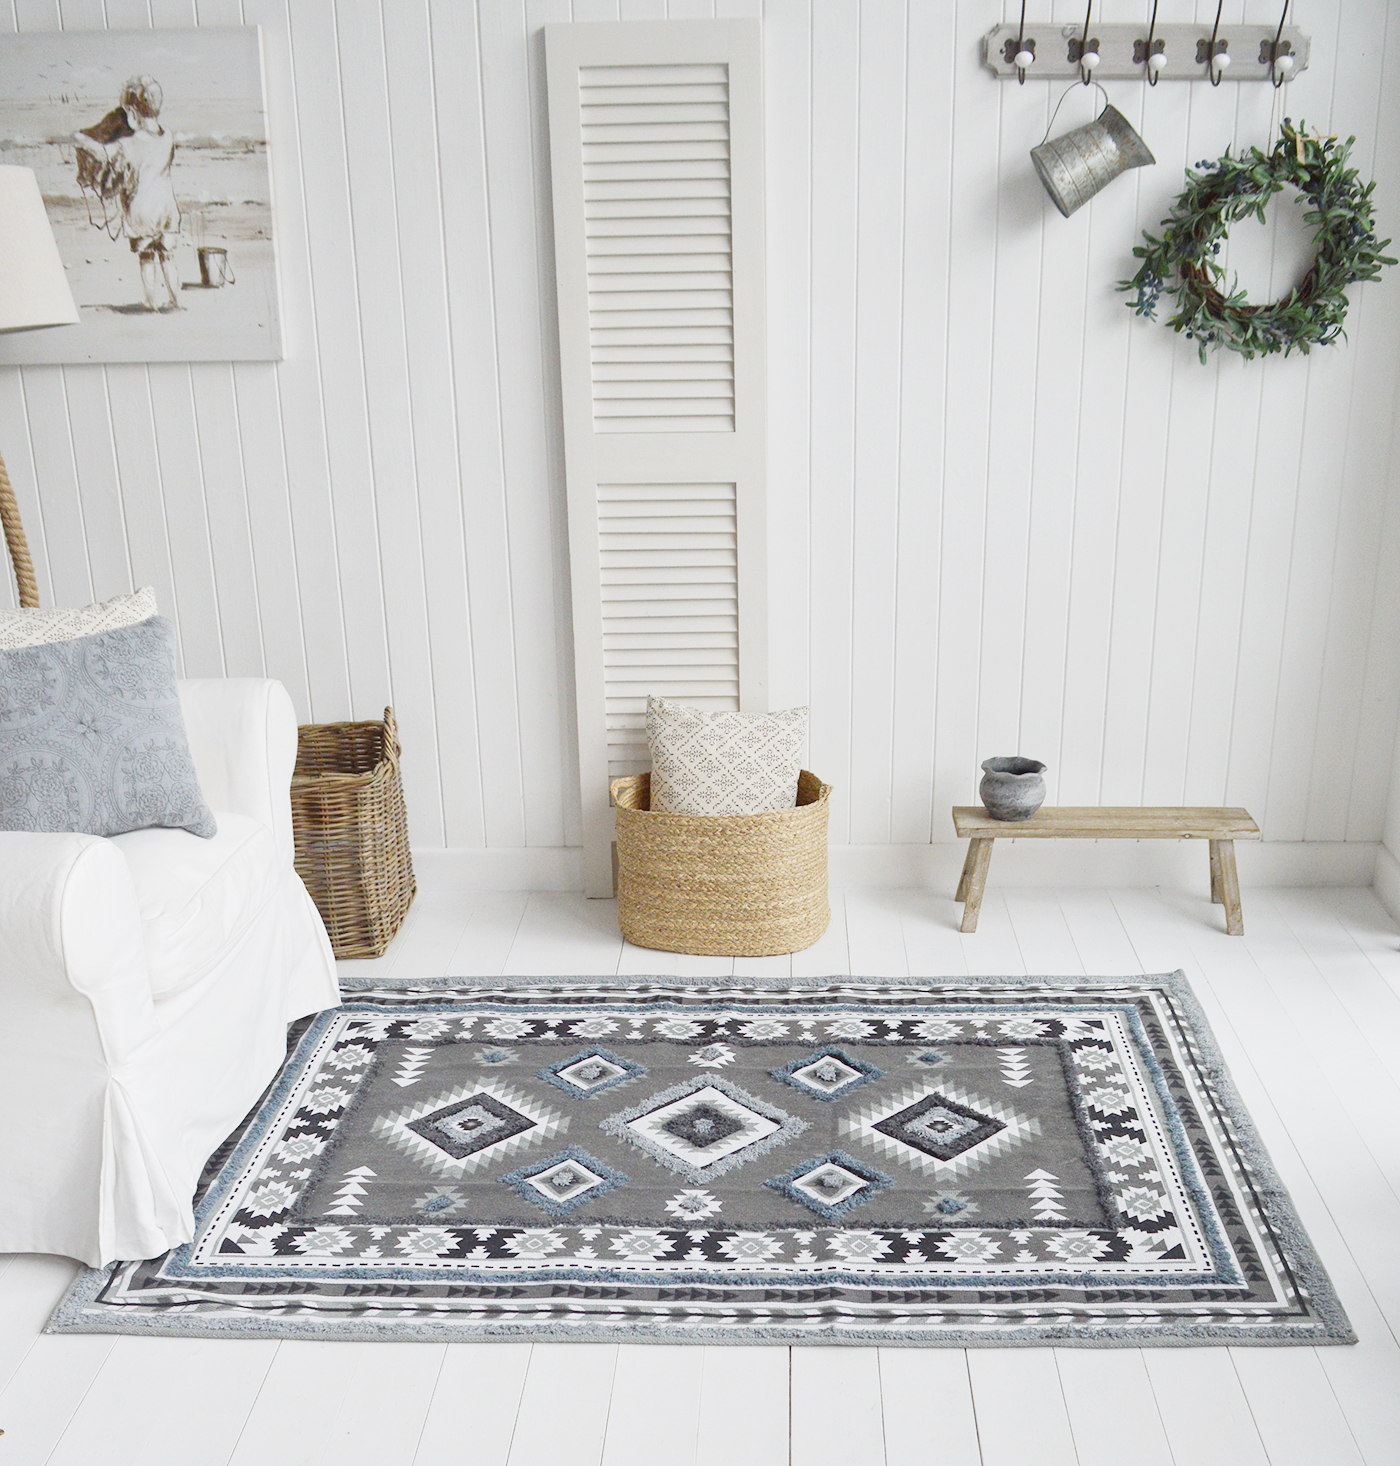 Chatham Floor Rug for New England homes and Interiors. Coastal and country furniture and home accessories